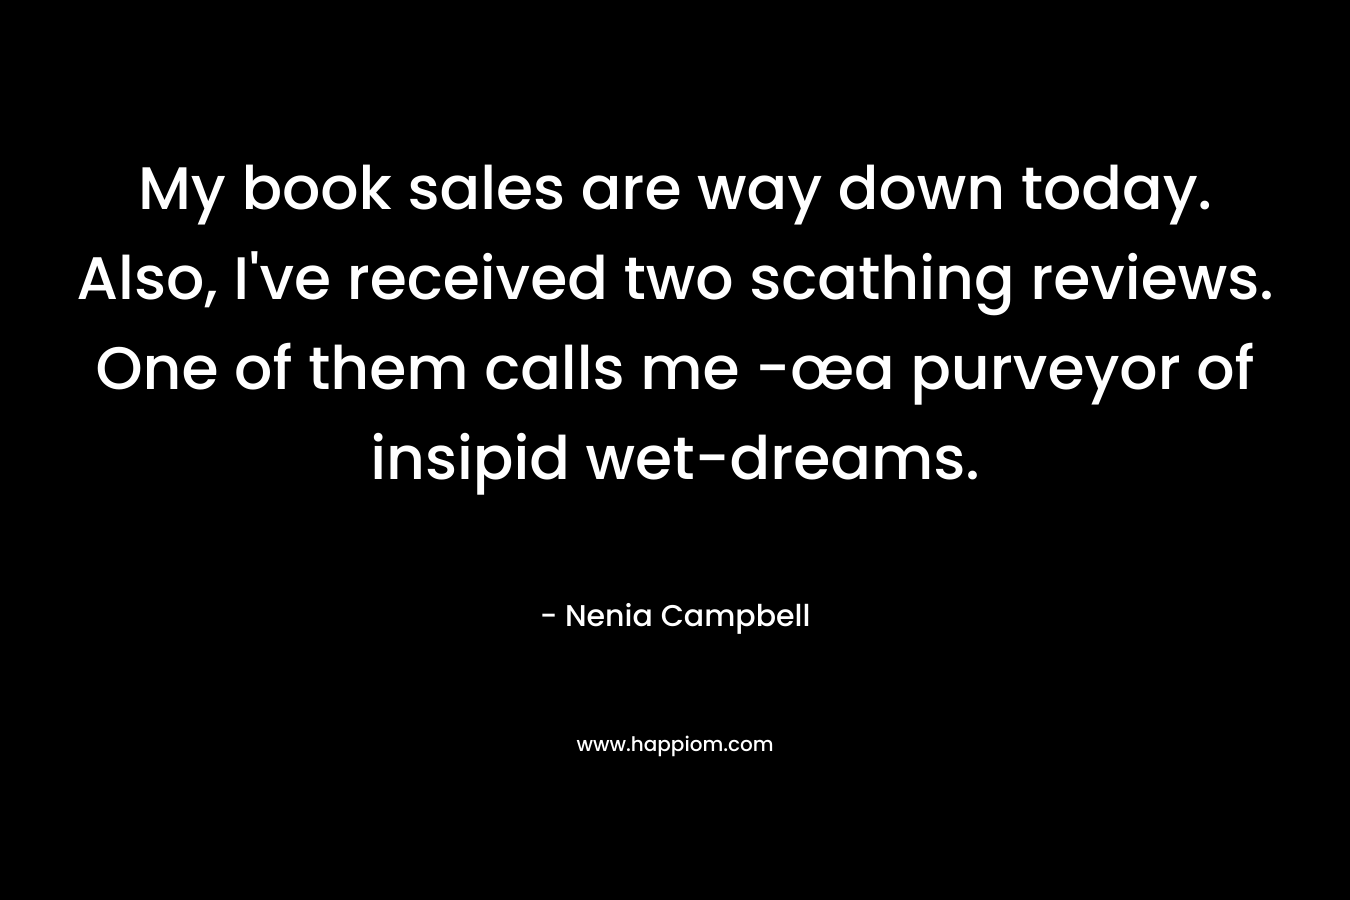 My book sales are way down today. Also, I’ve received two scathing reviews. One of them calls me -œa purveyor of insipid wet-dreams. – Nenia Campbell